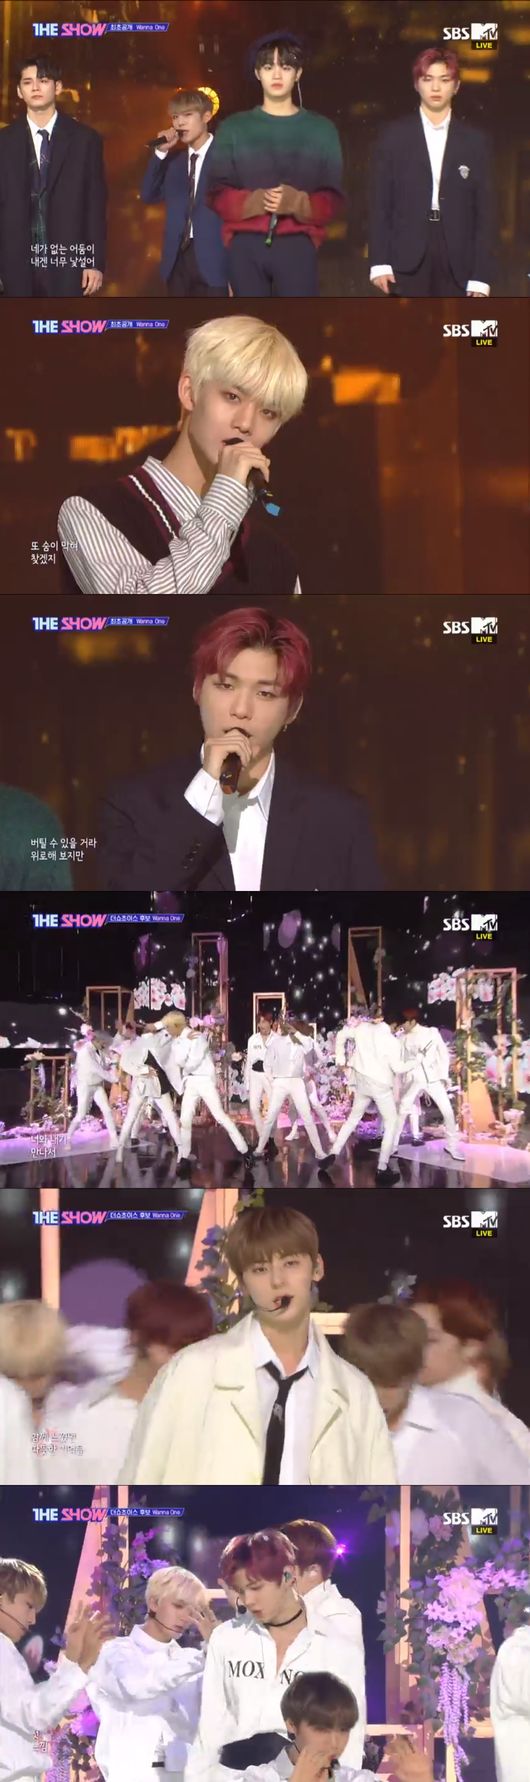 ..the last flower path beginsGroup Wanna One is the first place at the same time as comebackHe won the trophy.Wanna One, EXID, and NCT127 were the first places on SBS MTV The ShowWanna One to spring breeze as she competes for a spottook the place.On the day, Wanna One showed two stages on the comeback stage, including the title song Spring Breeze and Sulae.In the Sulrae stage, he conveyed his heart to his fans and gave a new charm to the stage with calm sensibility in Spring breeze stage.Hotshot showed the stage of I hate you with sad sensibility, and JBJ95 attracted attention with its sophisticated performance and warm charm on HOME stage.The NCT127 thrilled fans with its powerful stage as expected on the new song Simon Says stage.Meanwhile, The Show was staged by Wanna One, EXID, NCT127, JBJ95, Golden Child, HOTSHOT, Mighty Mouse, Voysper, Atez, Dream Note, Pink Fantasy, Jay, Nature, TeRish, CAMLA, FMAVOR, Mott.